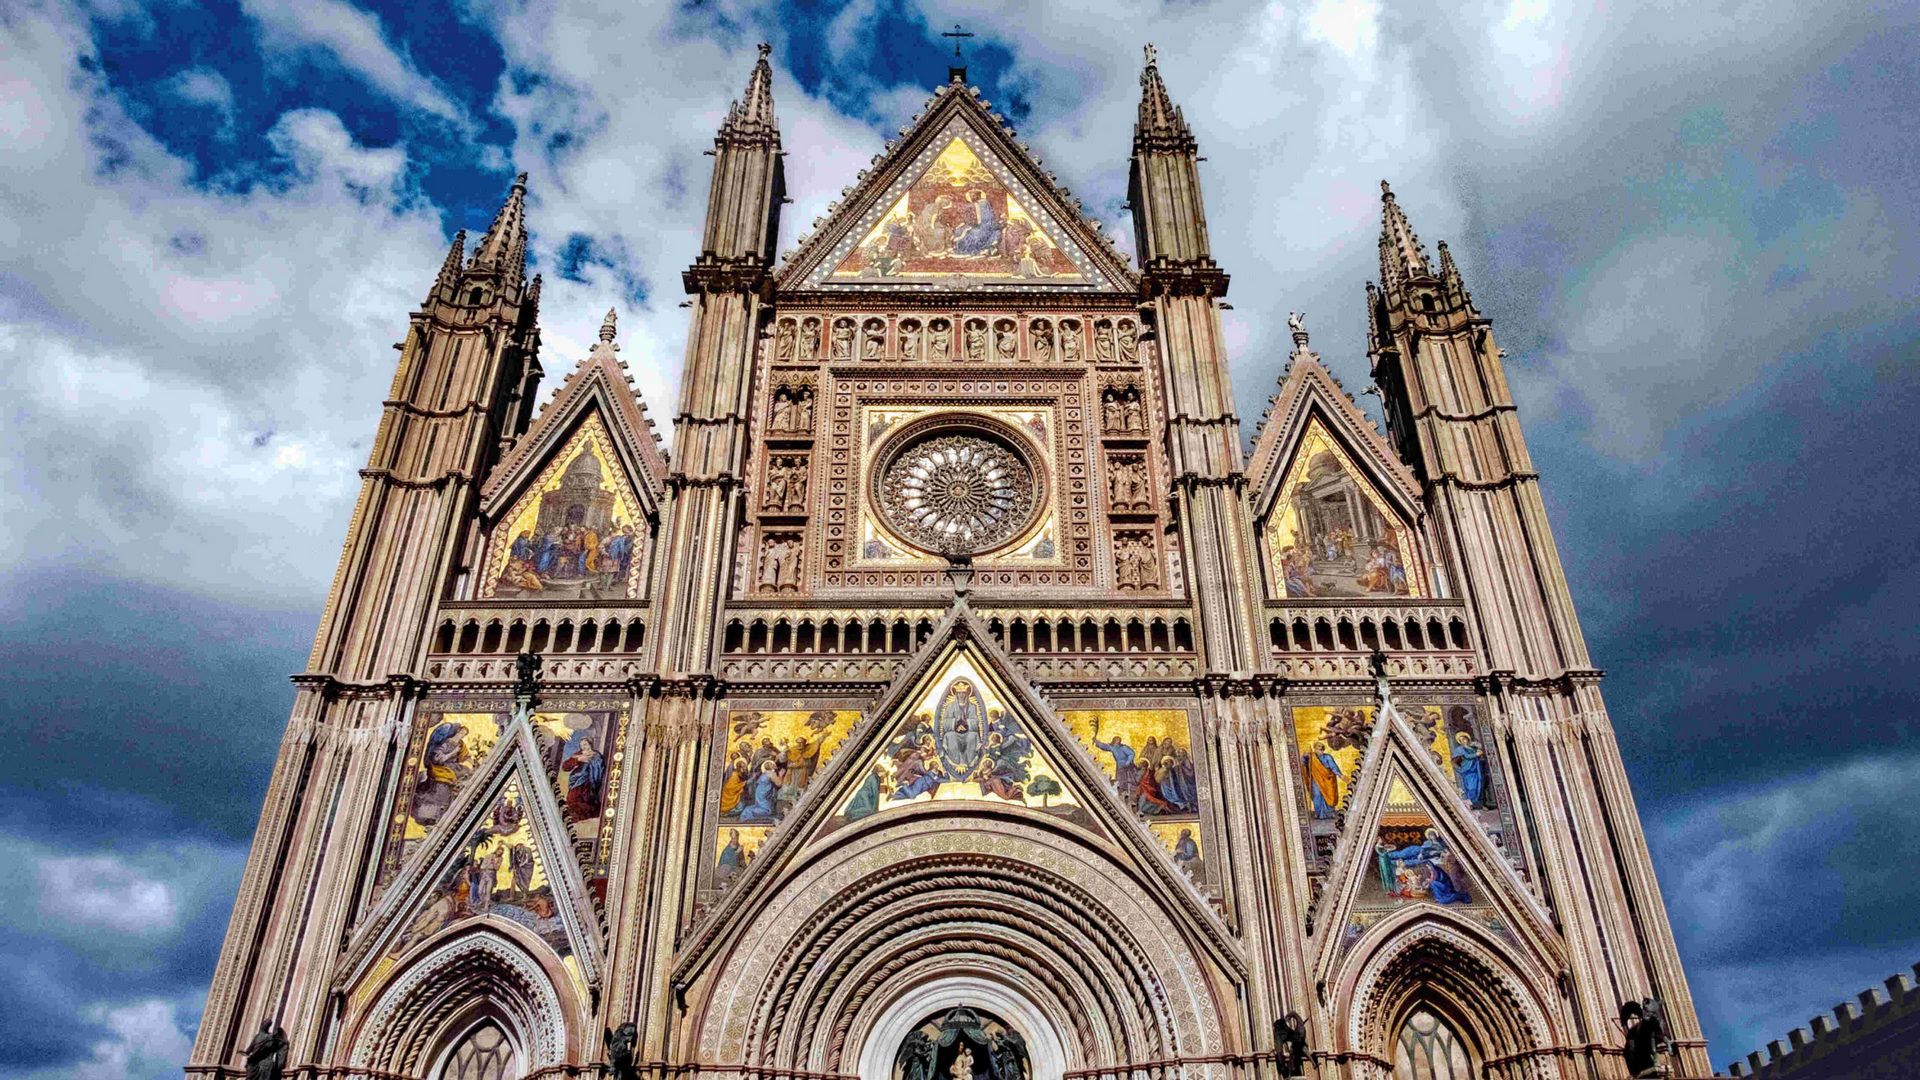 Orvieto, Highlighted tour, Walking guided tour, Assisi guide, 1920x1080 Full HD Desktop